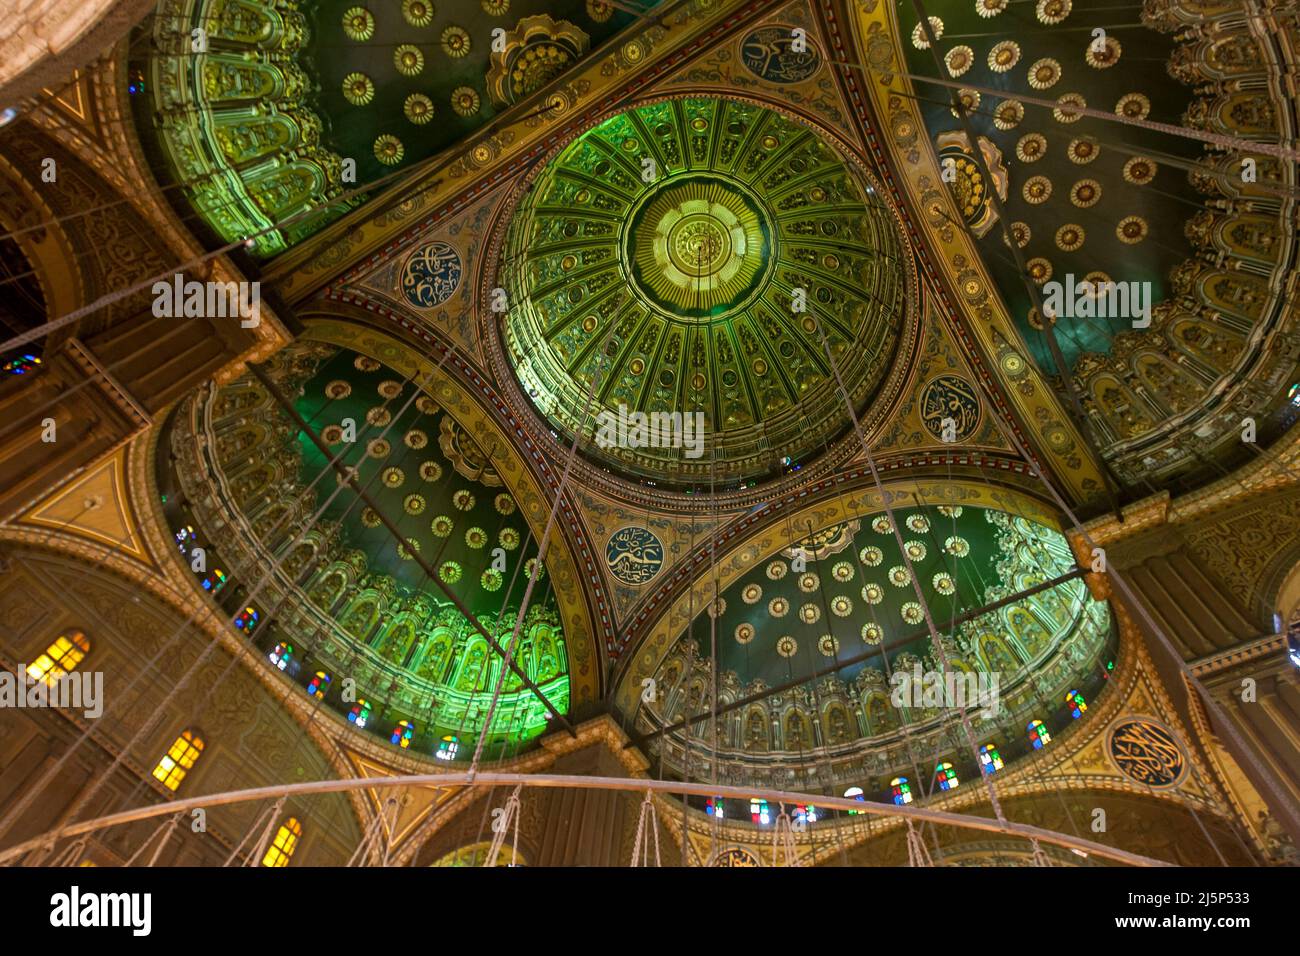 The interior ceiling of the Mosque of Muhammad Ali at the Cairo Citadel (Citadel of Salah Al-Din) in Cairo, Egypt. Stock Photo